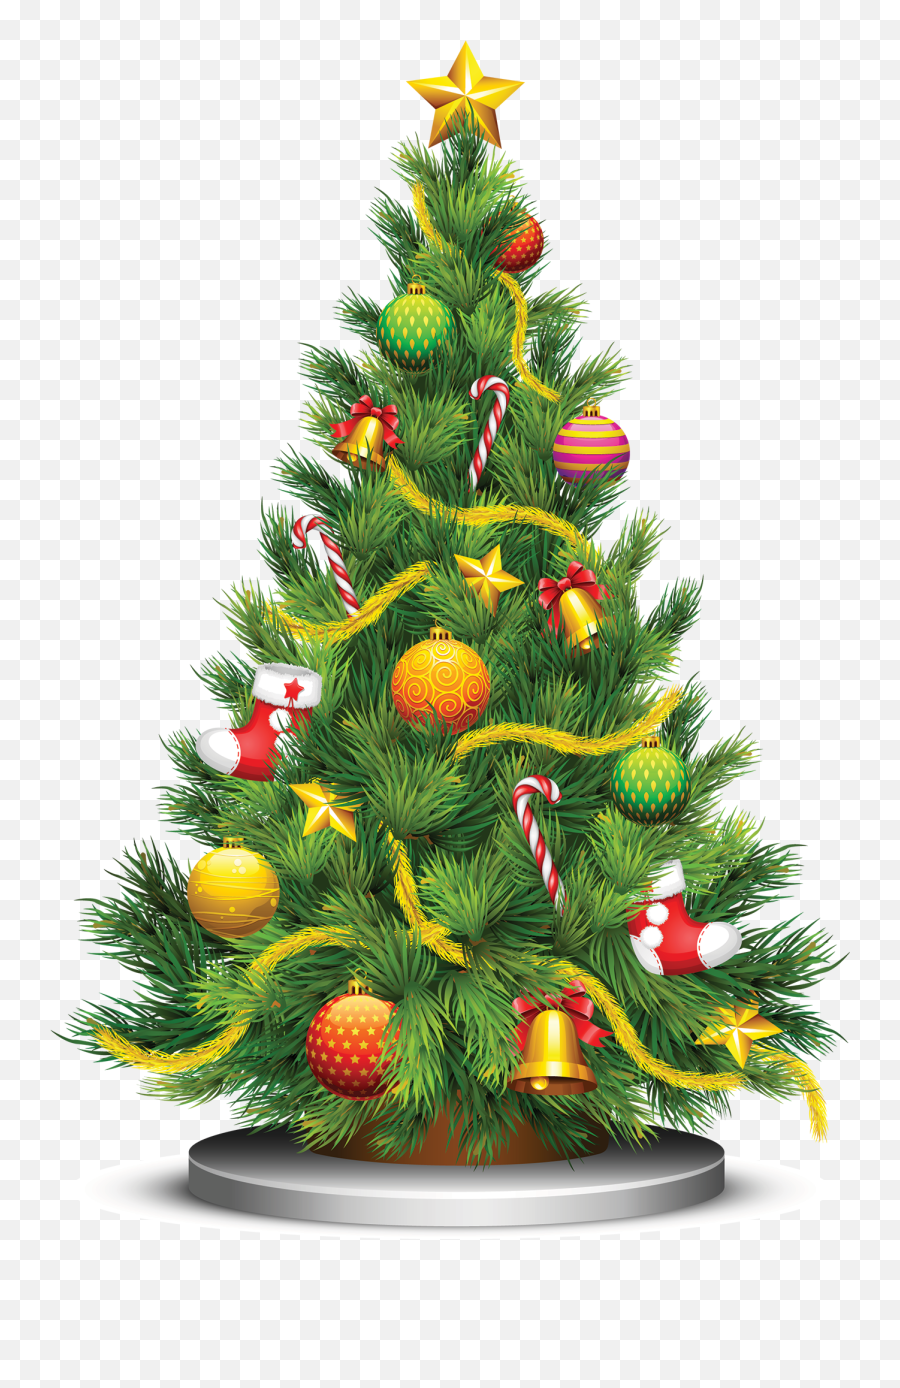 Christmas Tree Vector Png - Clipart Transparent Background Christmas Tree Emoji,Christmas Tree Vector Png